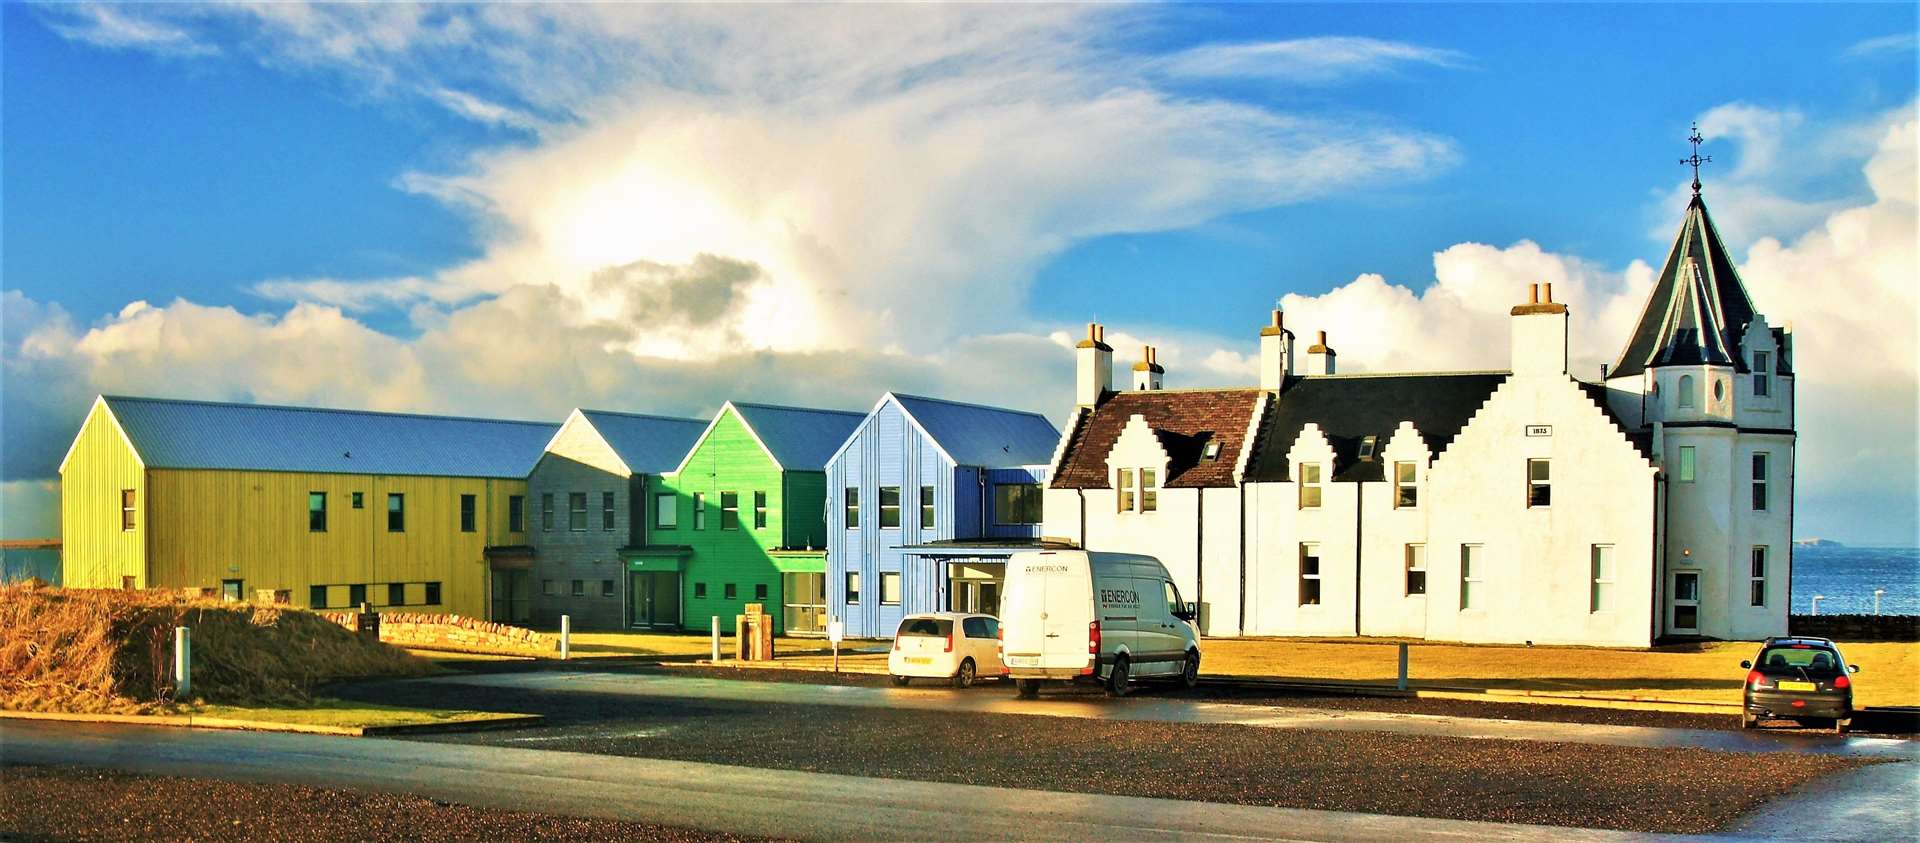 You can visit John O'Groats and hear a story while taking a scenic walk. Picture: DGS